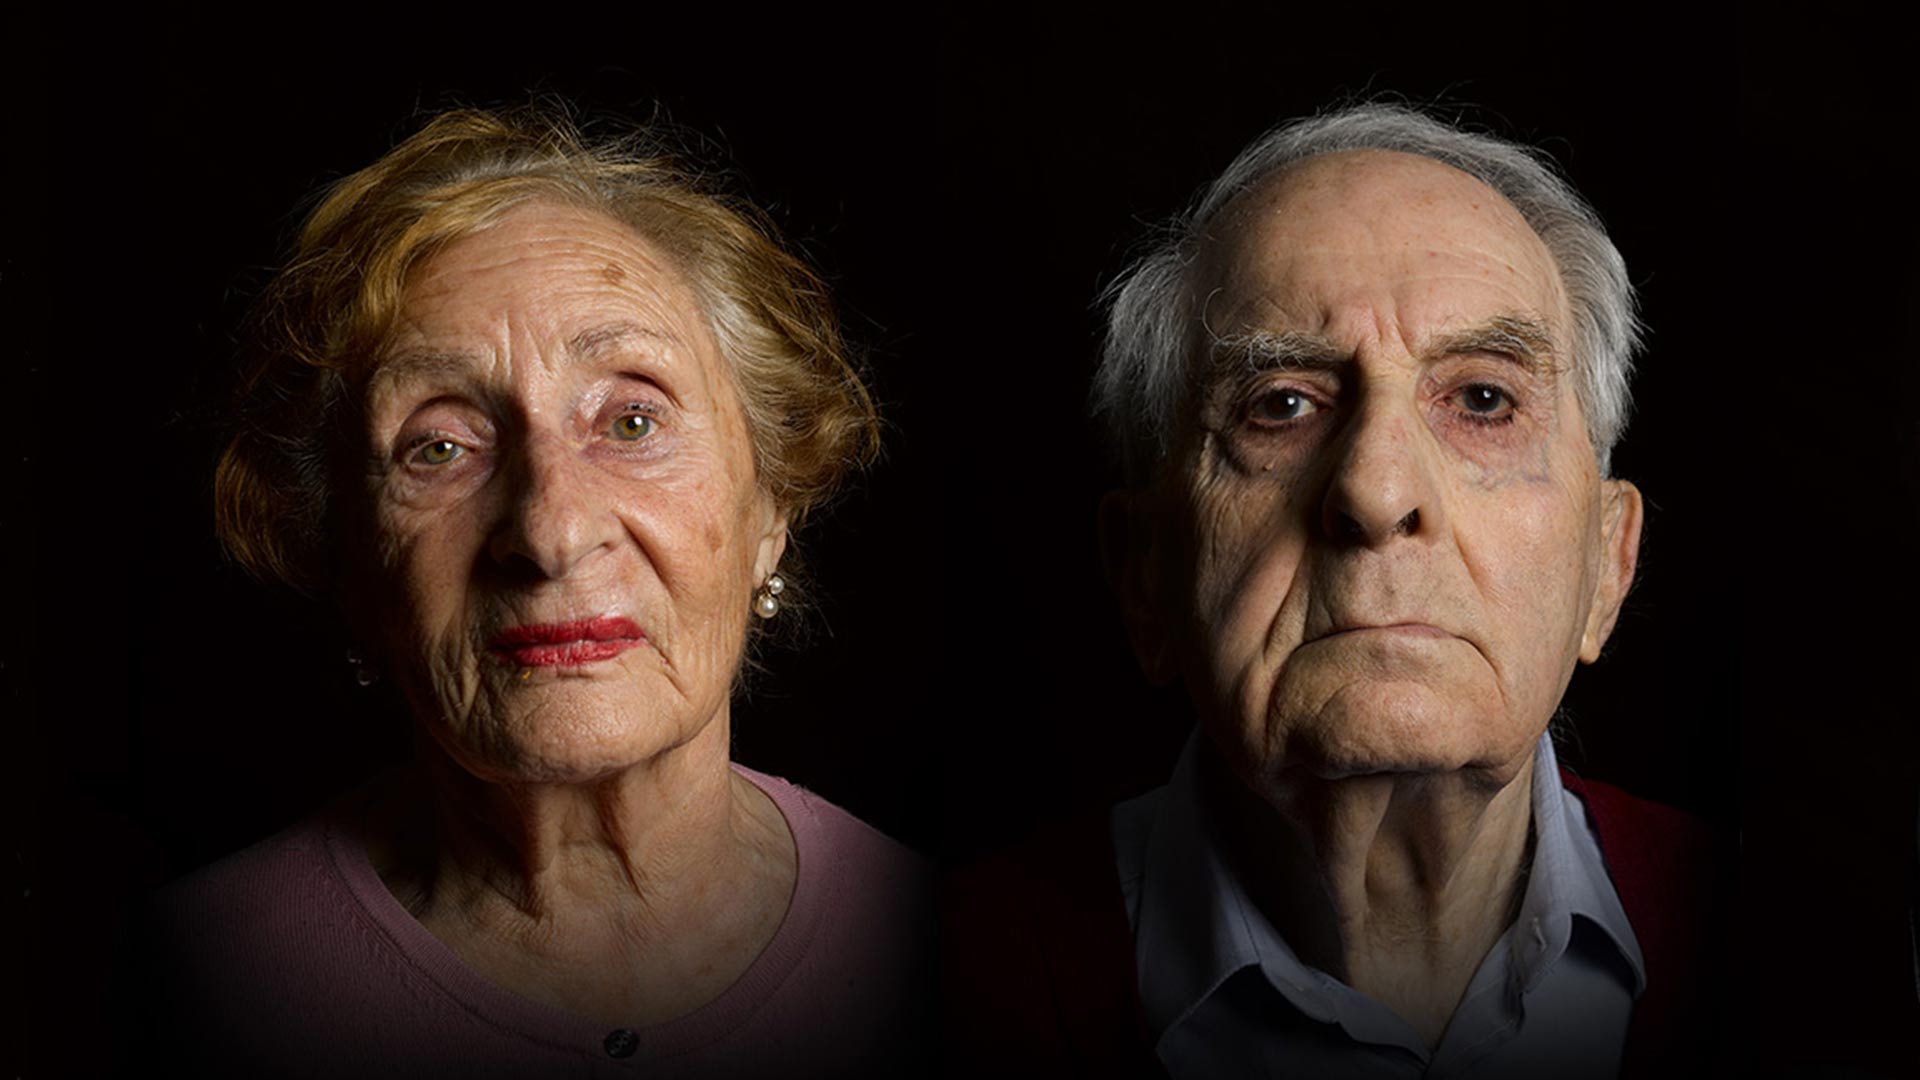 Only children at the time, these now elderly survivors reflect on how the trauma of the Holocaust has affected the rest of their lives. From left to right: Susan Pollack, Frank Bright.